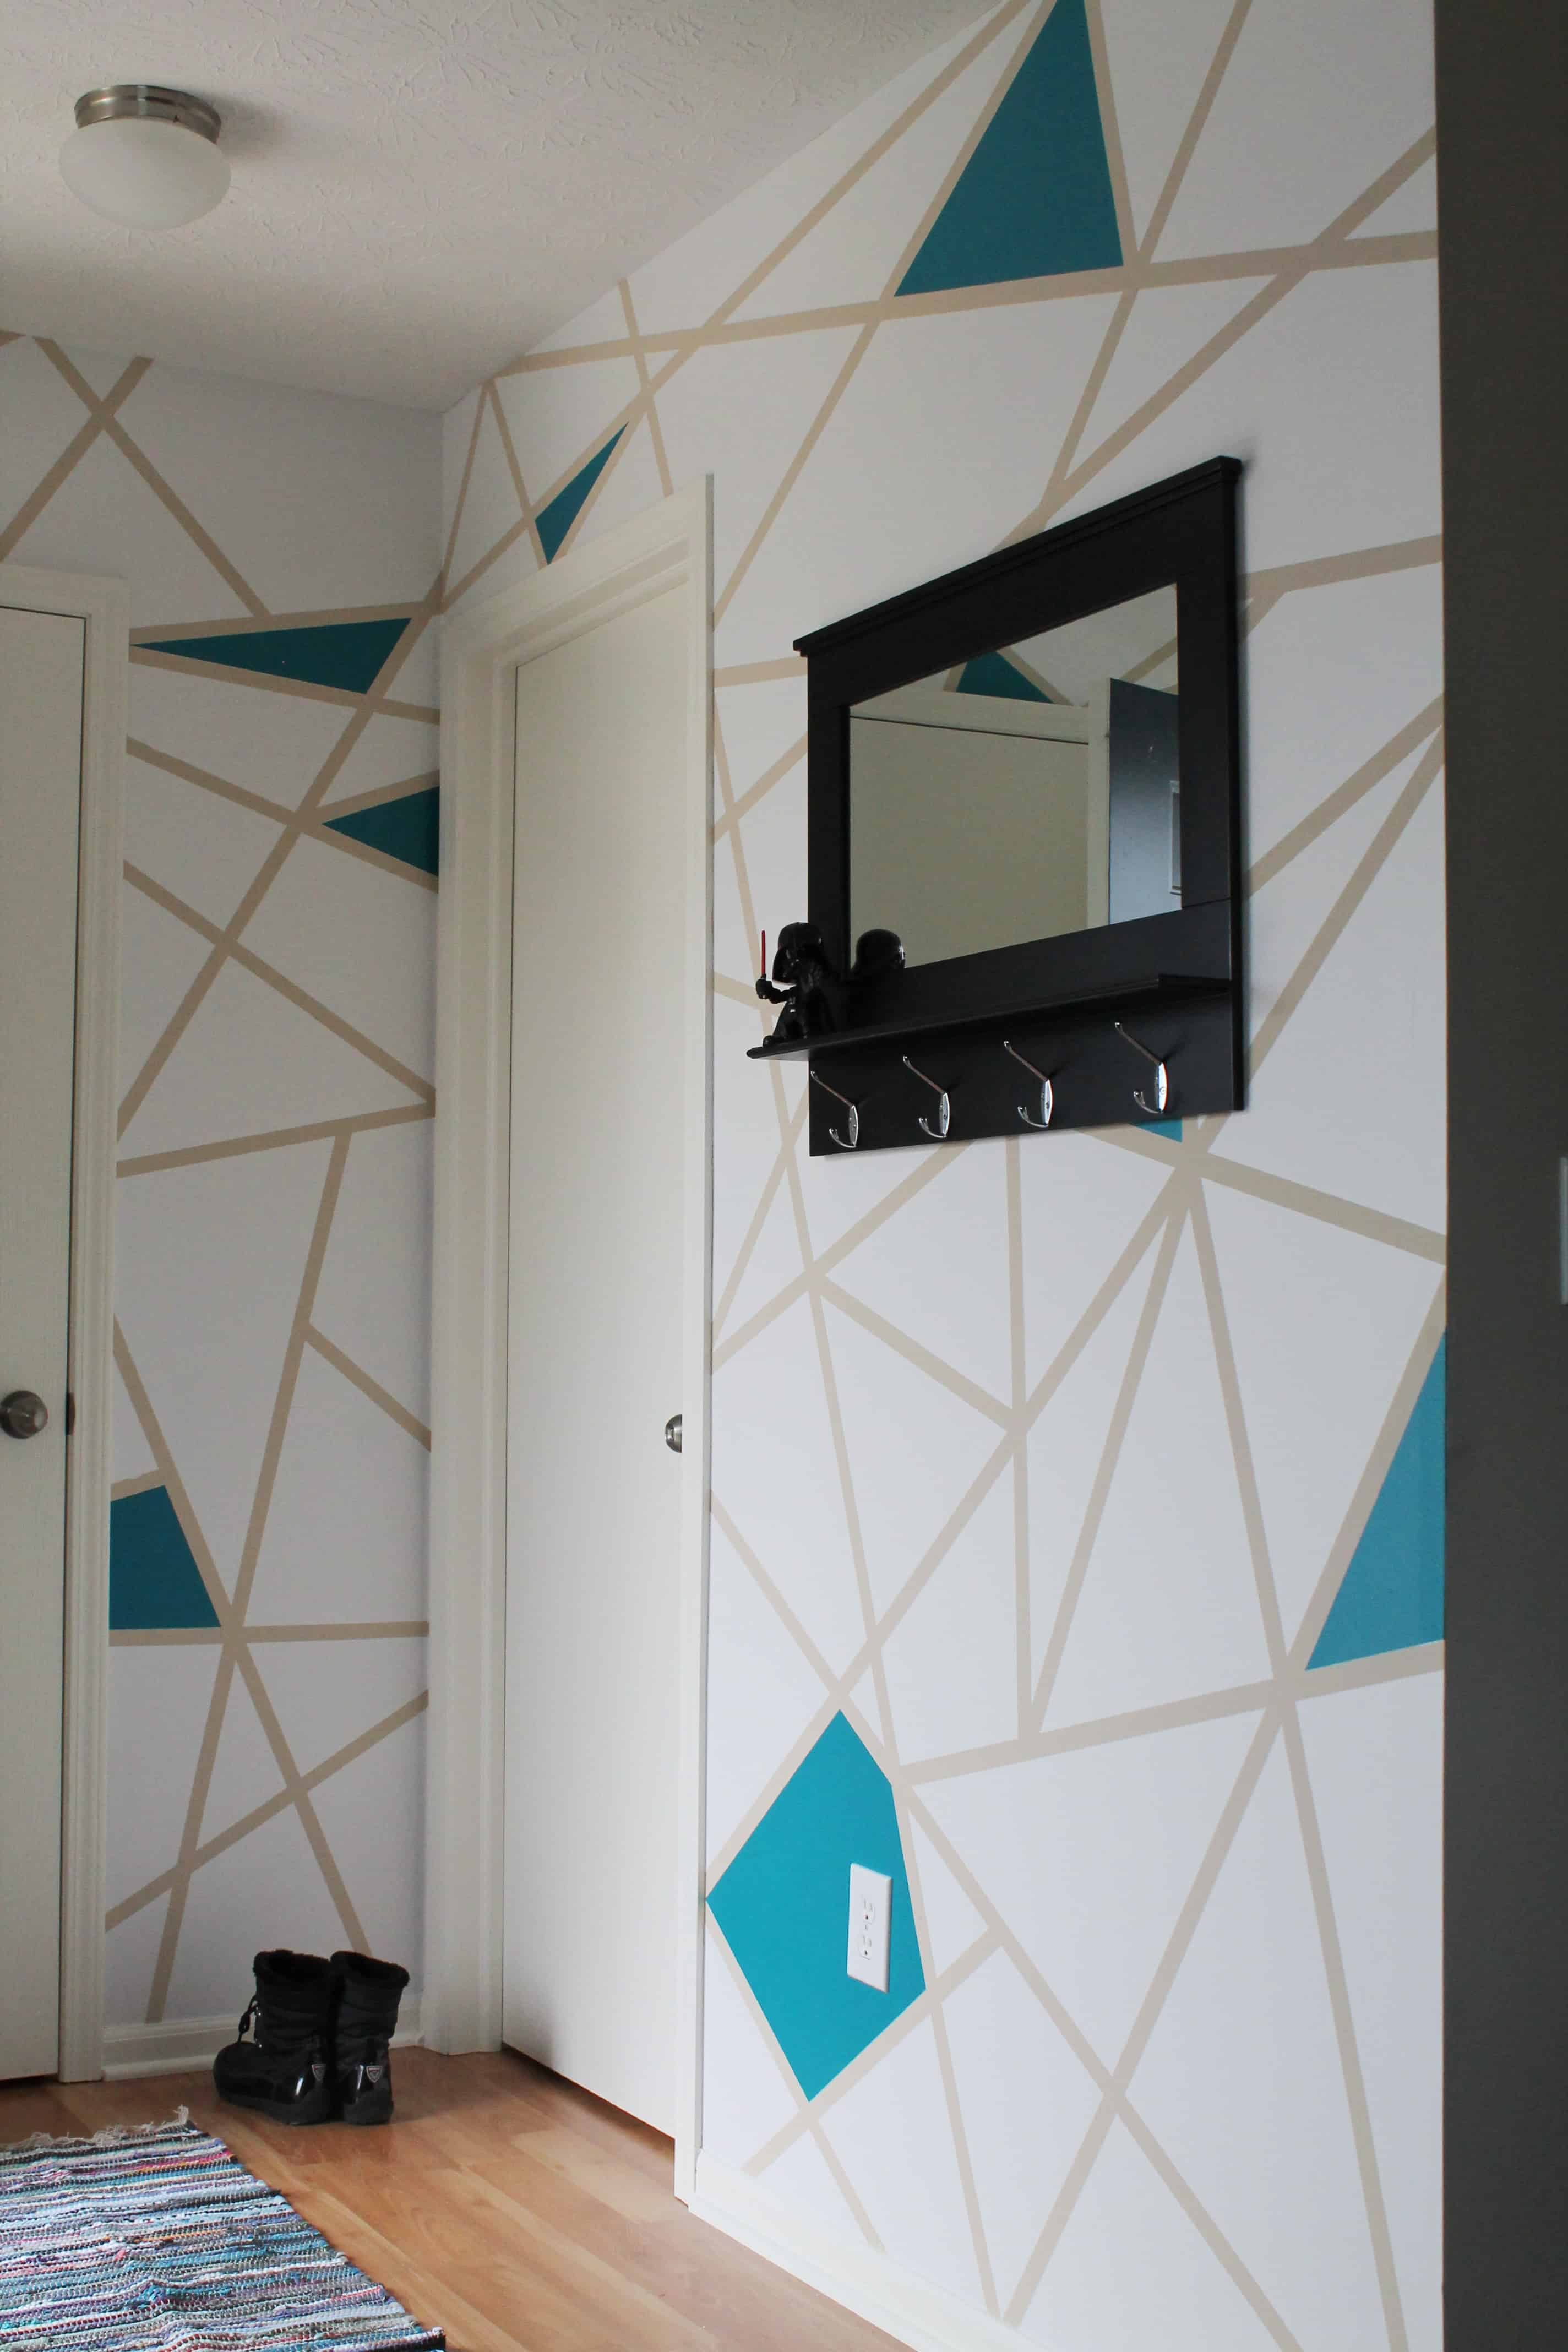 Painter's Tape Wall Designs